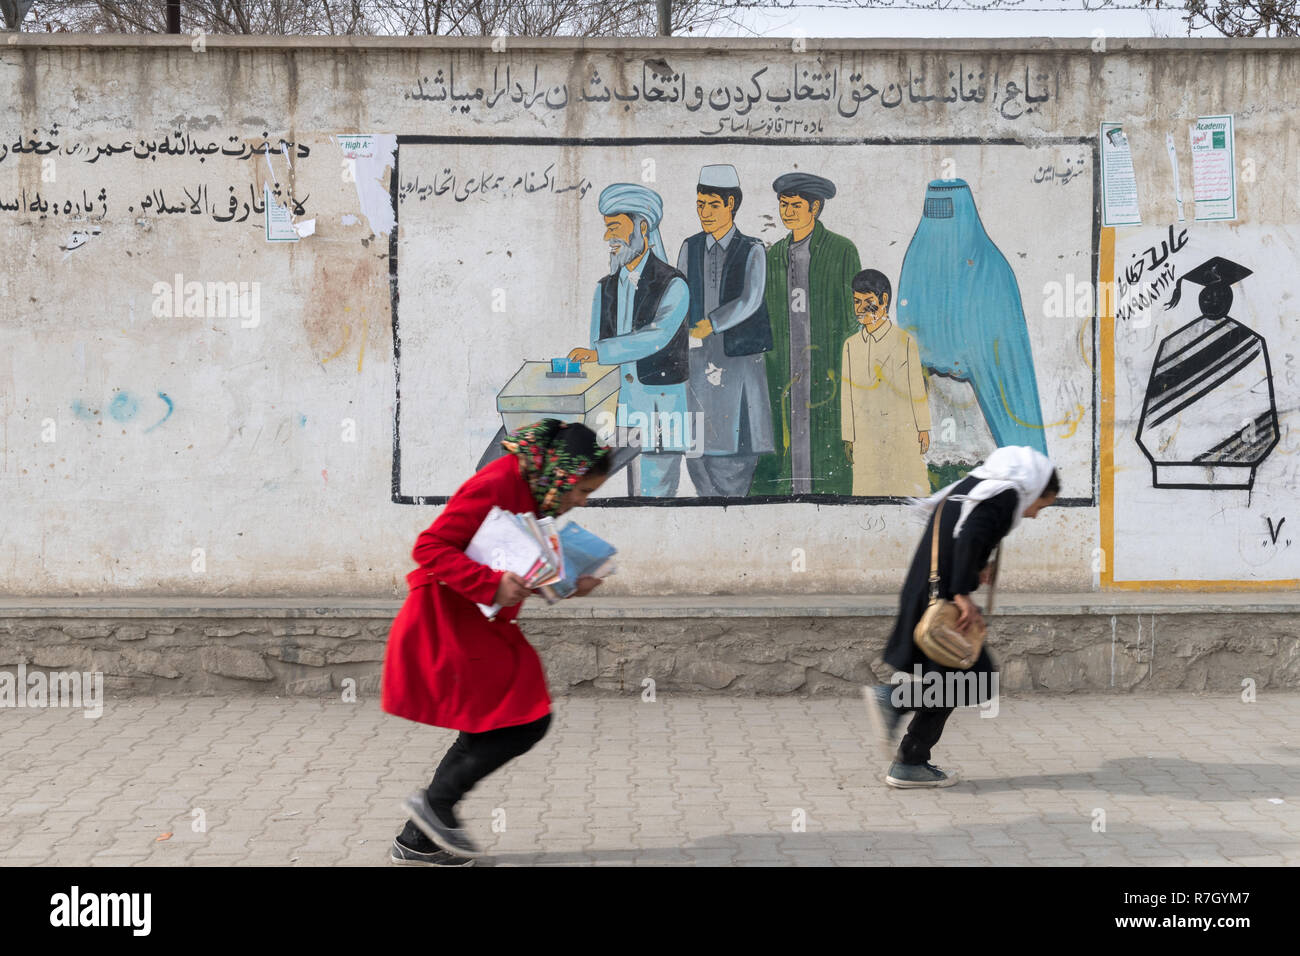 Girls Walking Back Home After School With A Mural Painting Promoting Voting For Men and Women, Kabul, Kabul Province, Afghanistan Stock Photo